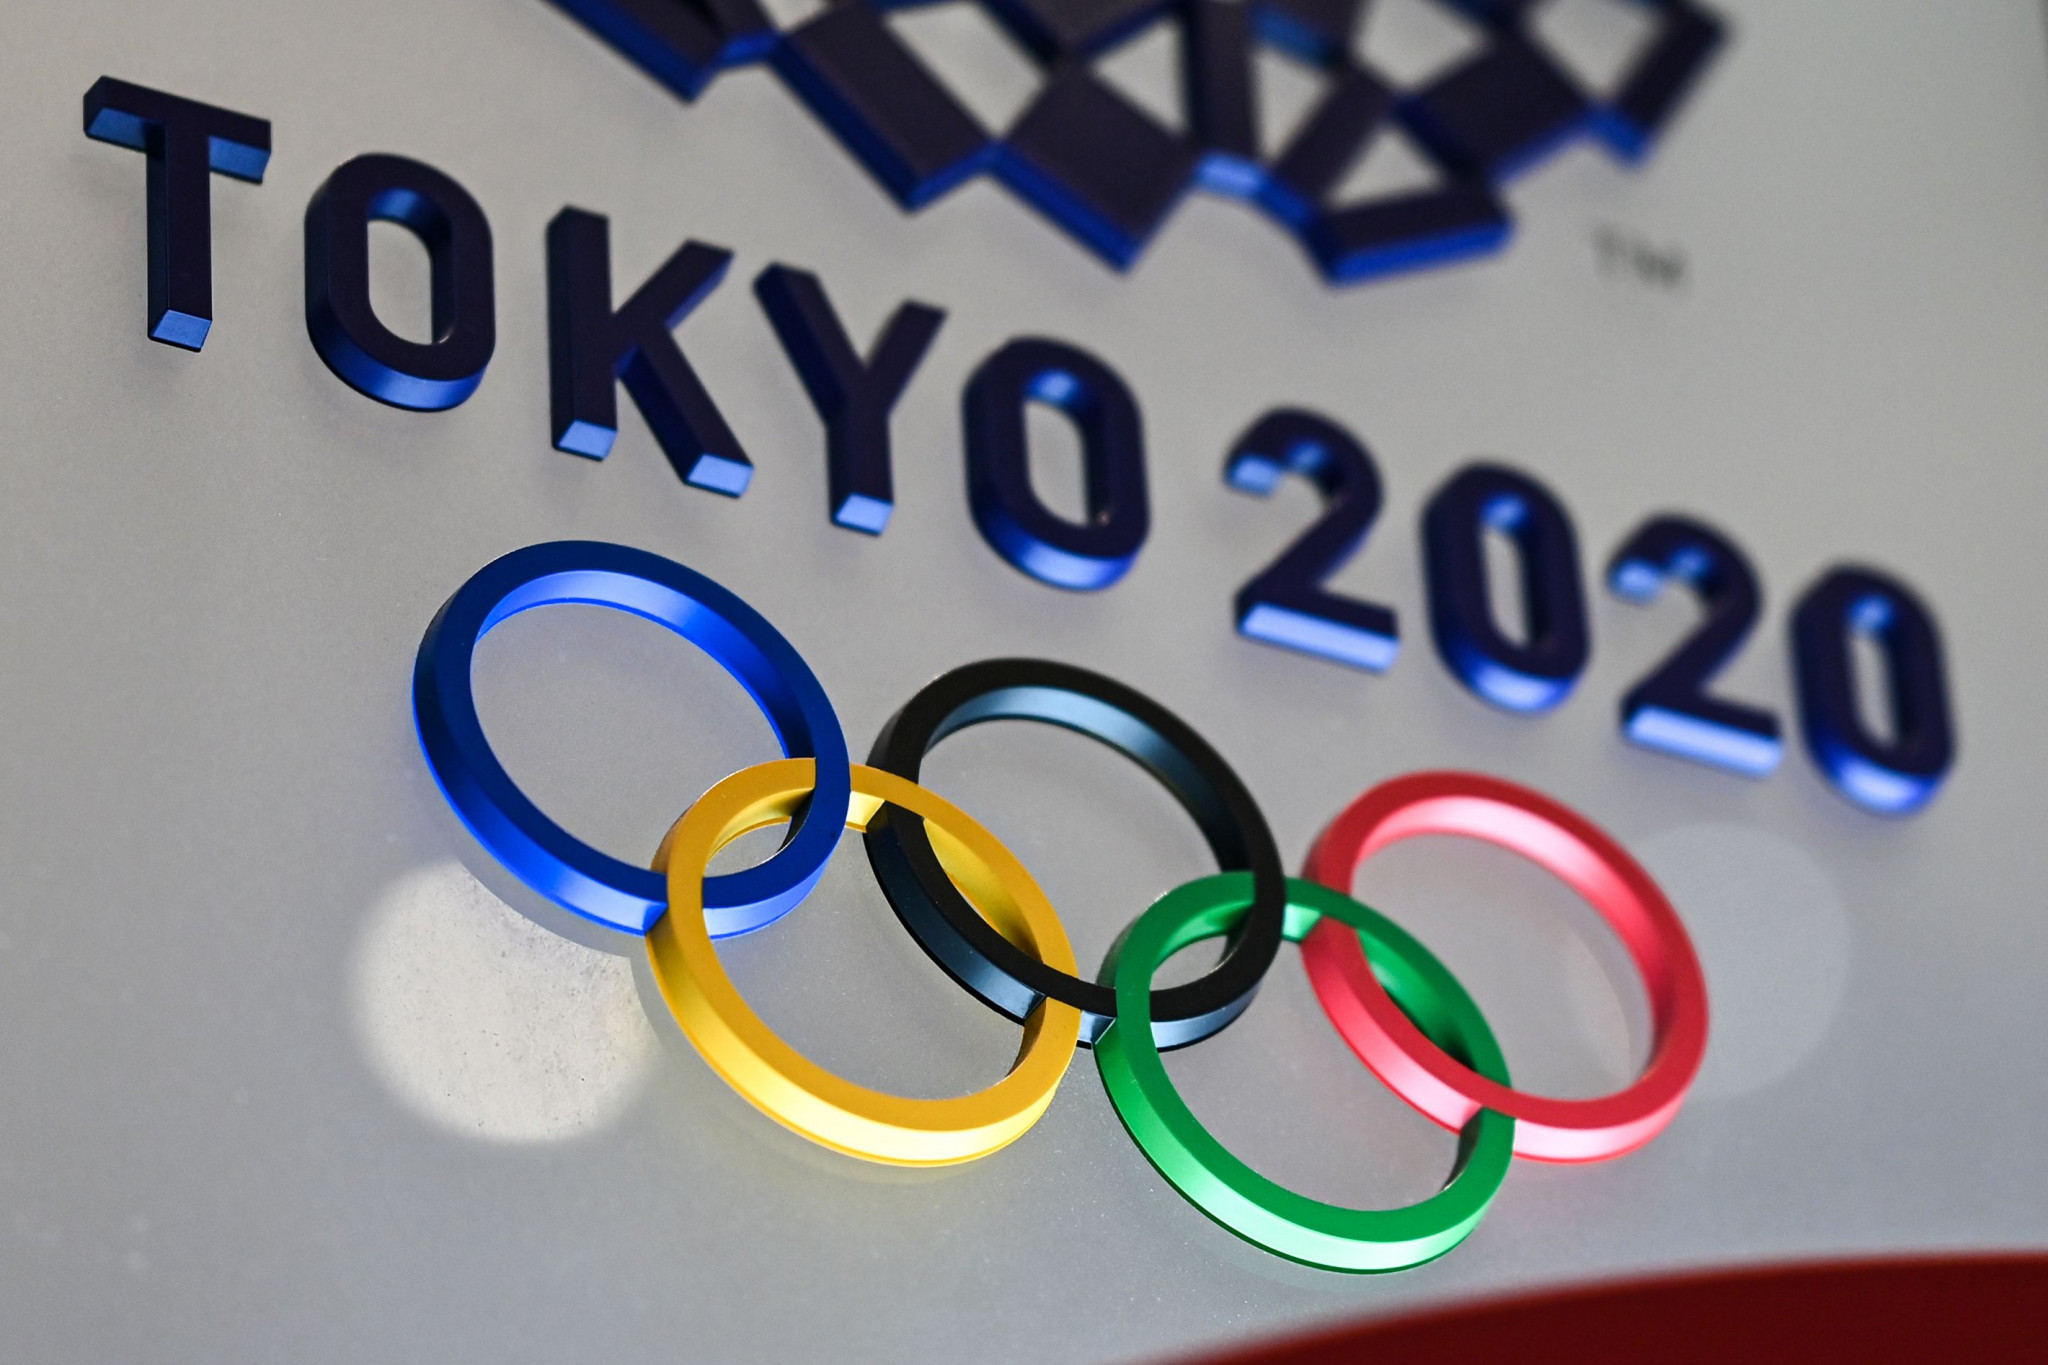 Tokyo 2020 plan meeting to discuss Mori's sexist remarks as 390 volunteers quit over comments